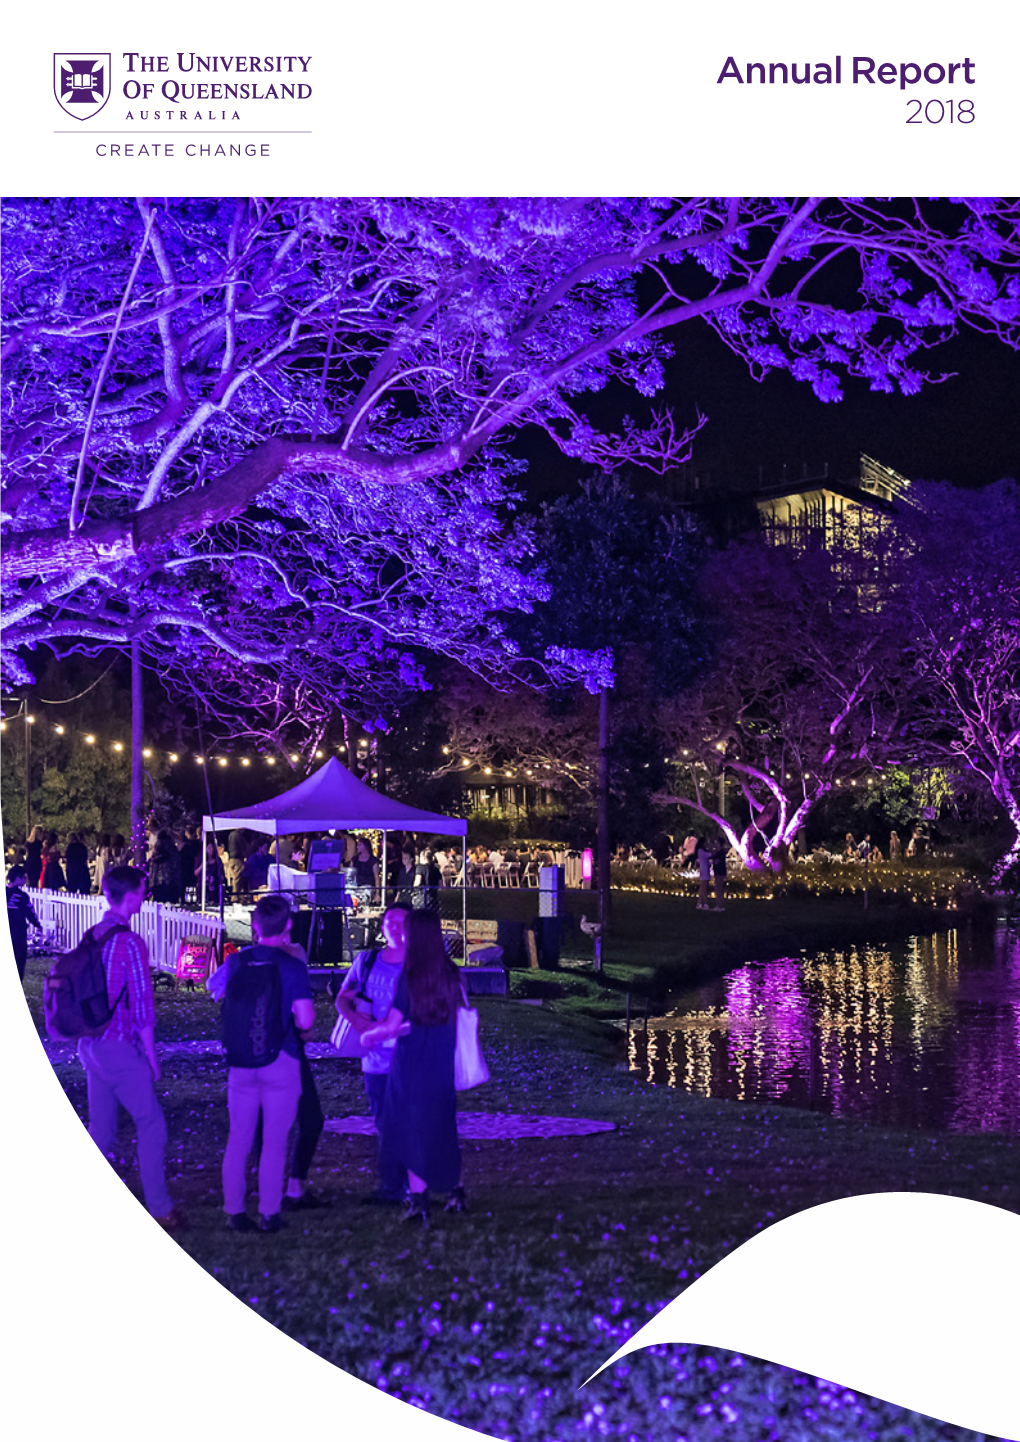 The University of Queensland Annual Report 2018